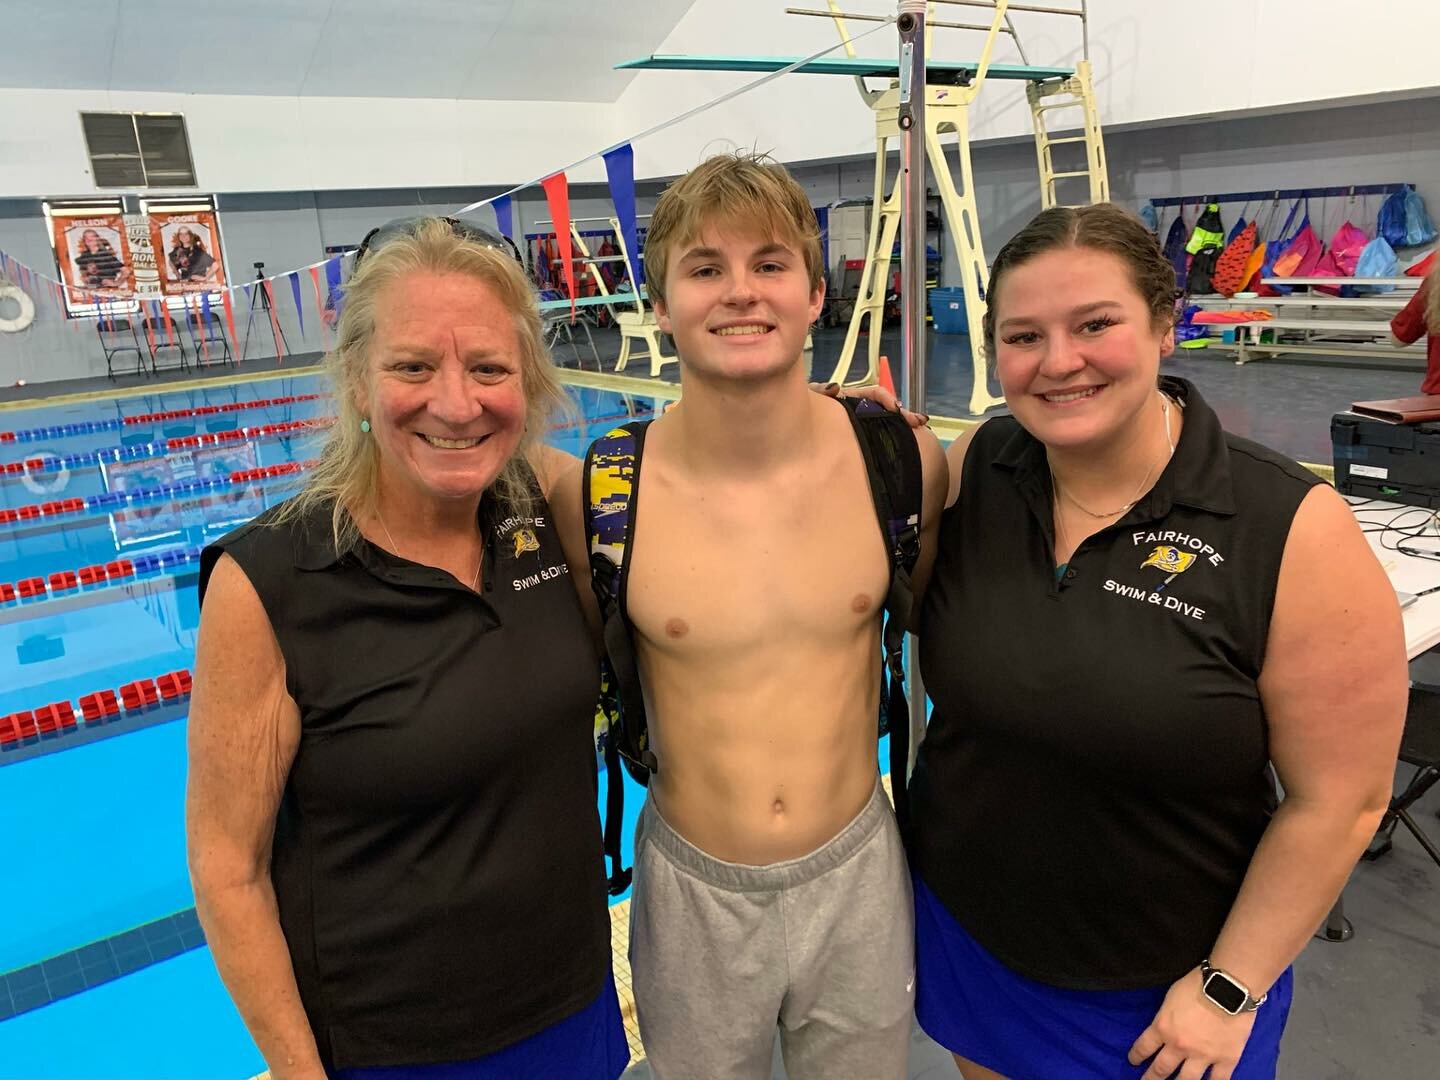 The Fairhope Pirates had a sectional champion on the diving board in Cooper Brechman who registered a score of 403.70 at the South Sectional Championship on Nov. 17.